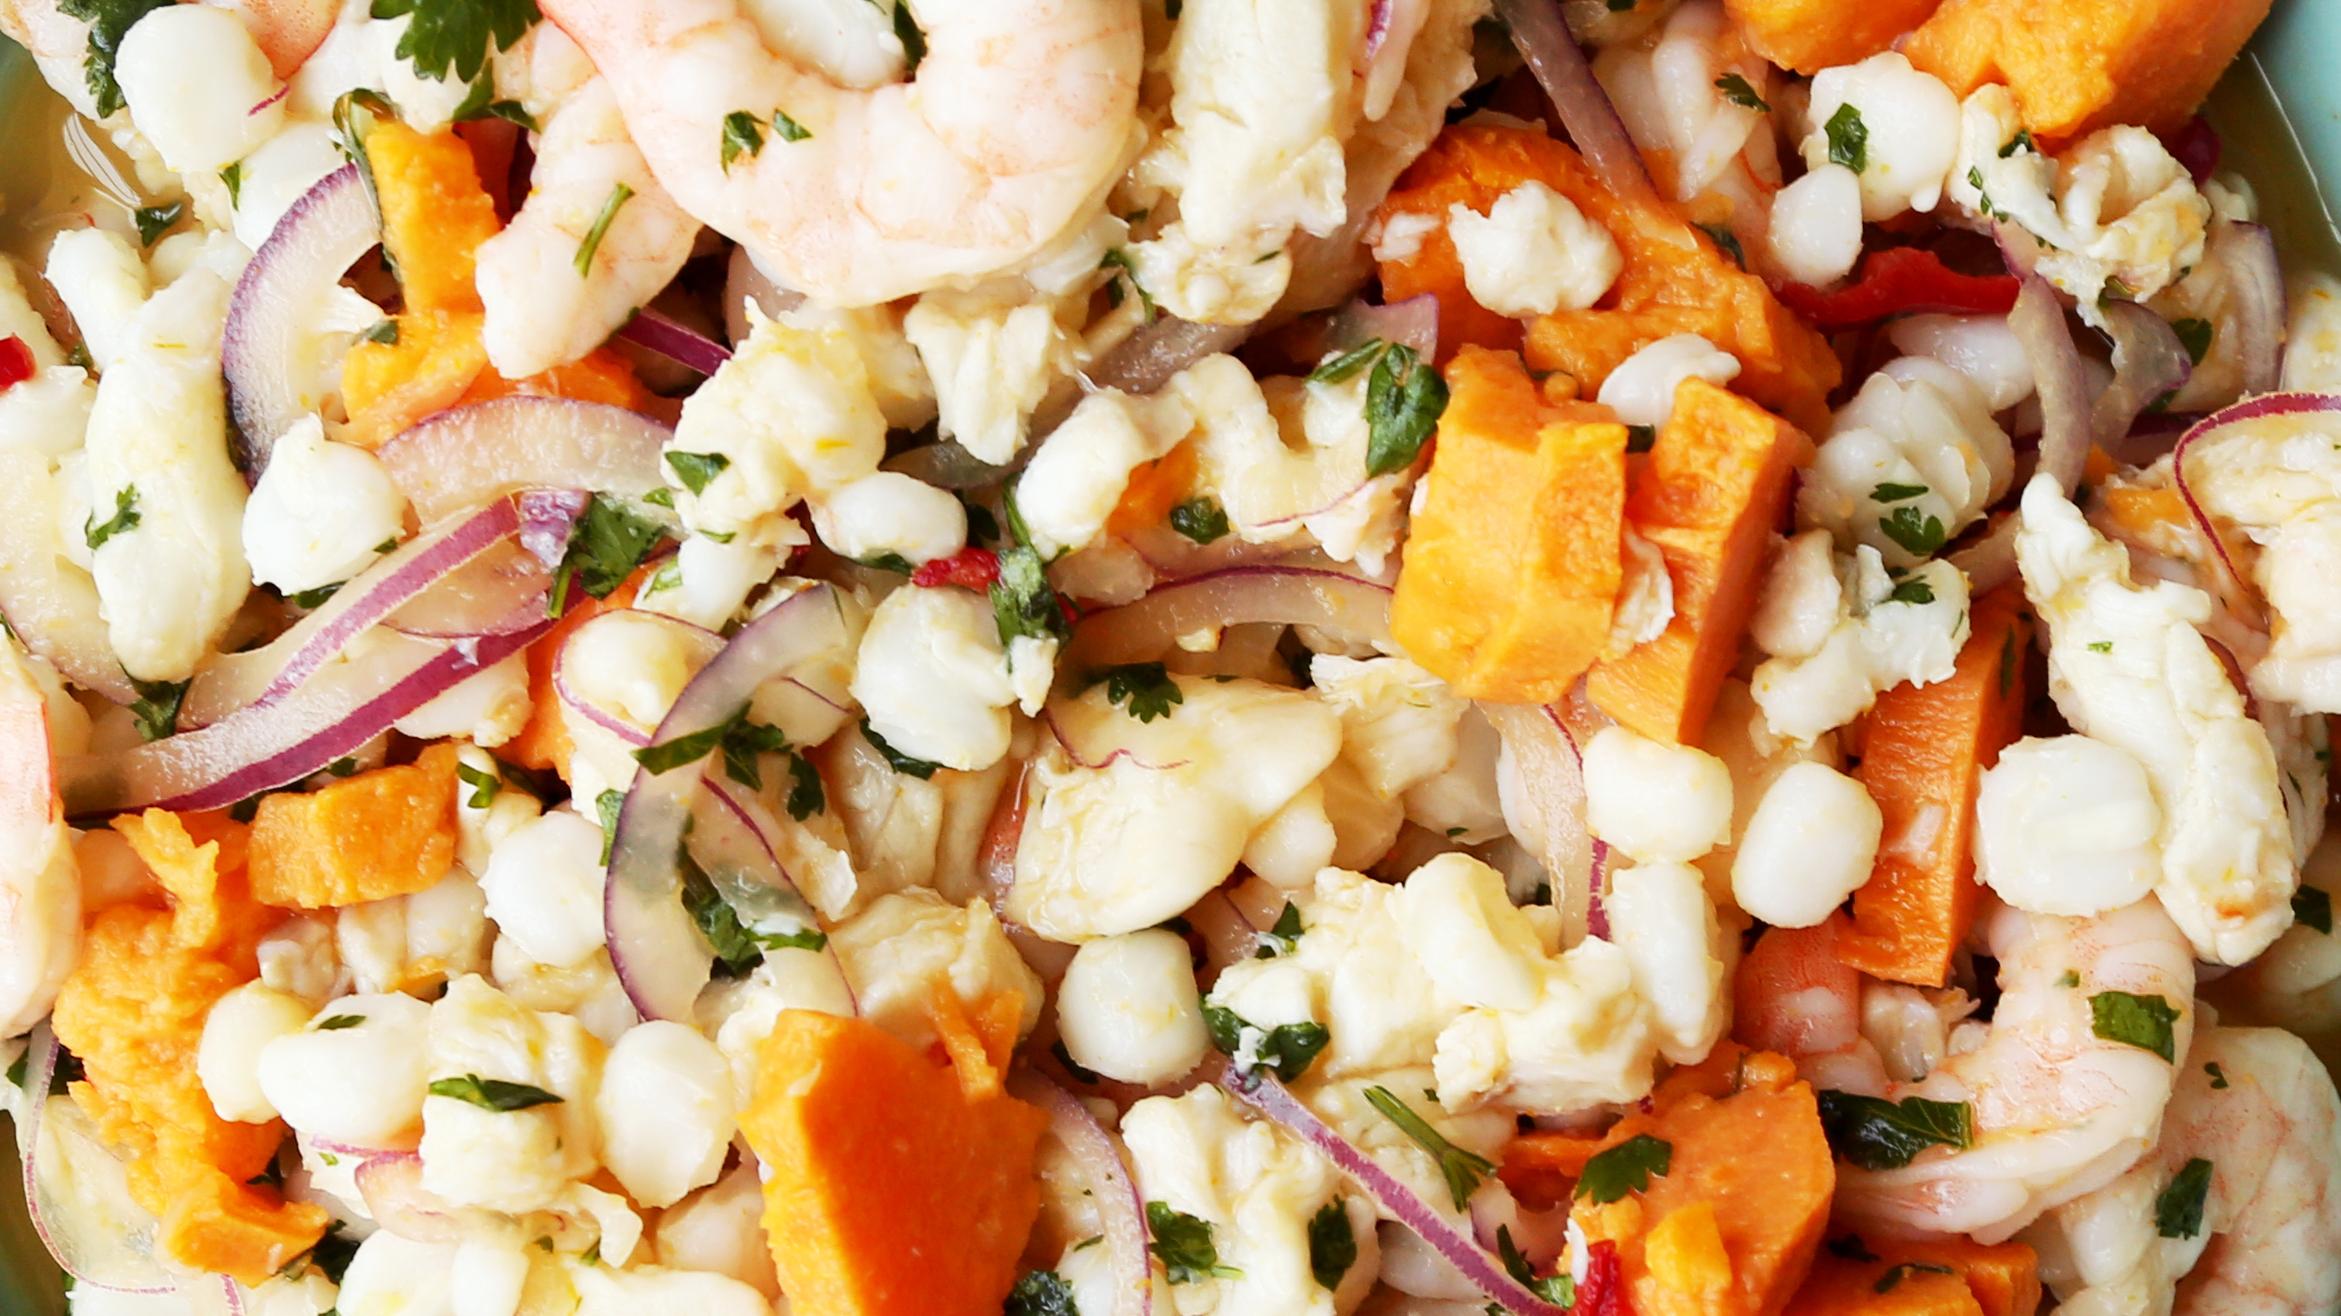  If you're looking for a light and refreshing summer meal, look no further than this Cebiche Mixto recipe.